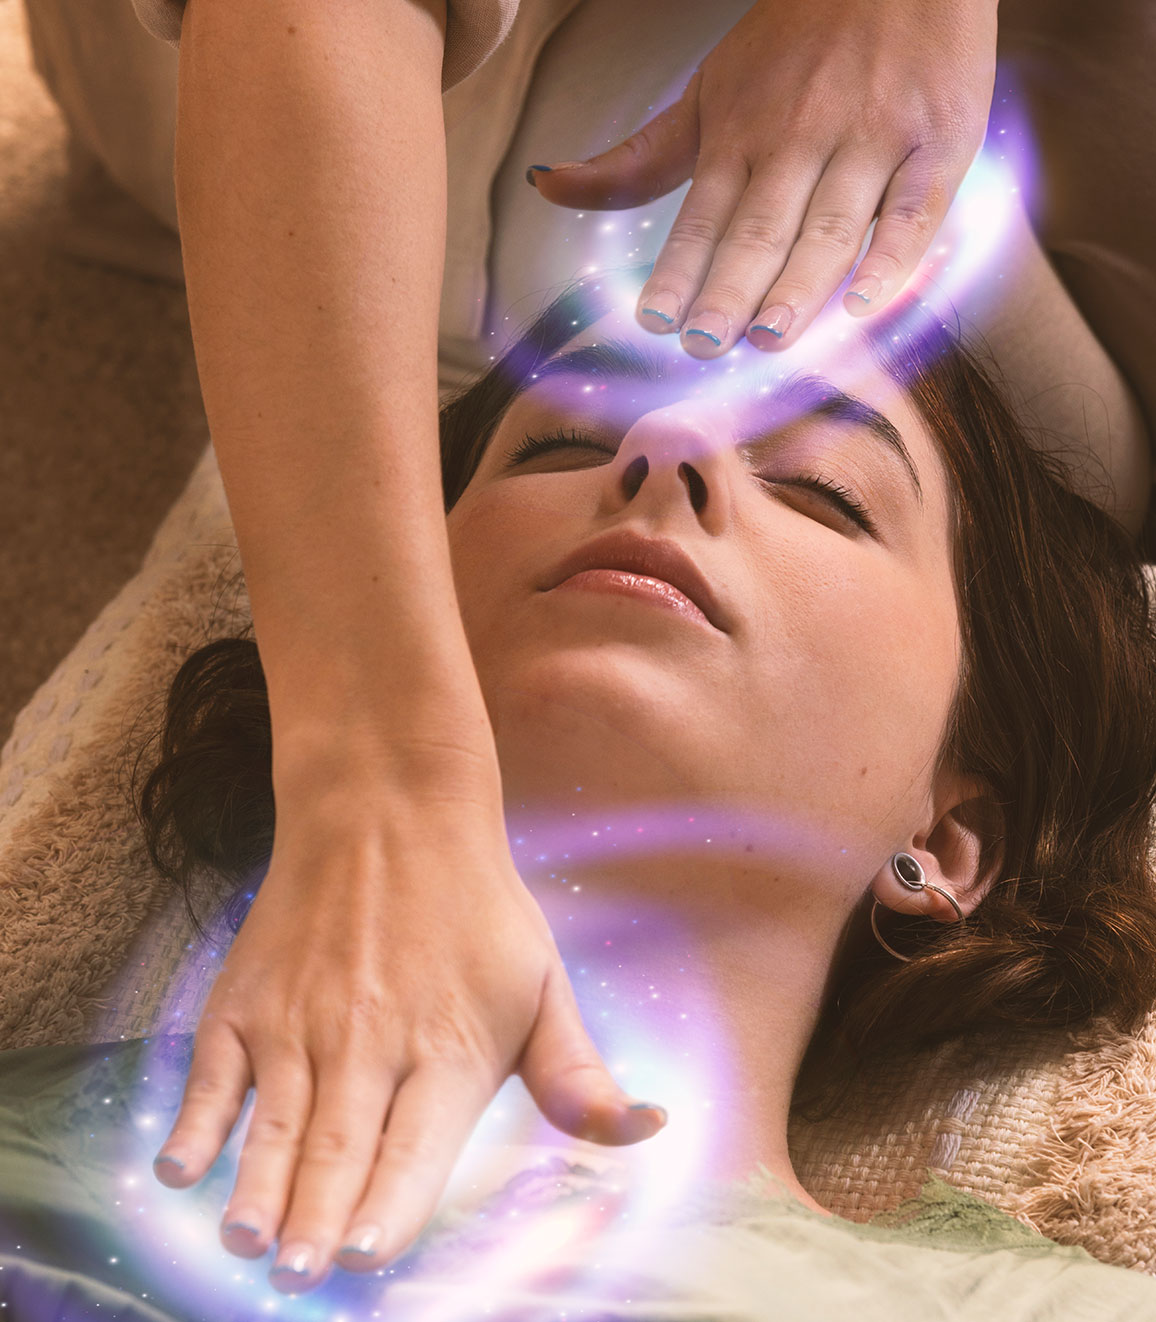  How Does Reiki Work